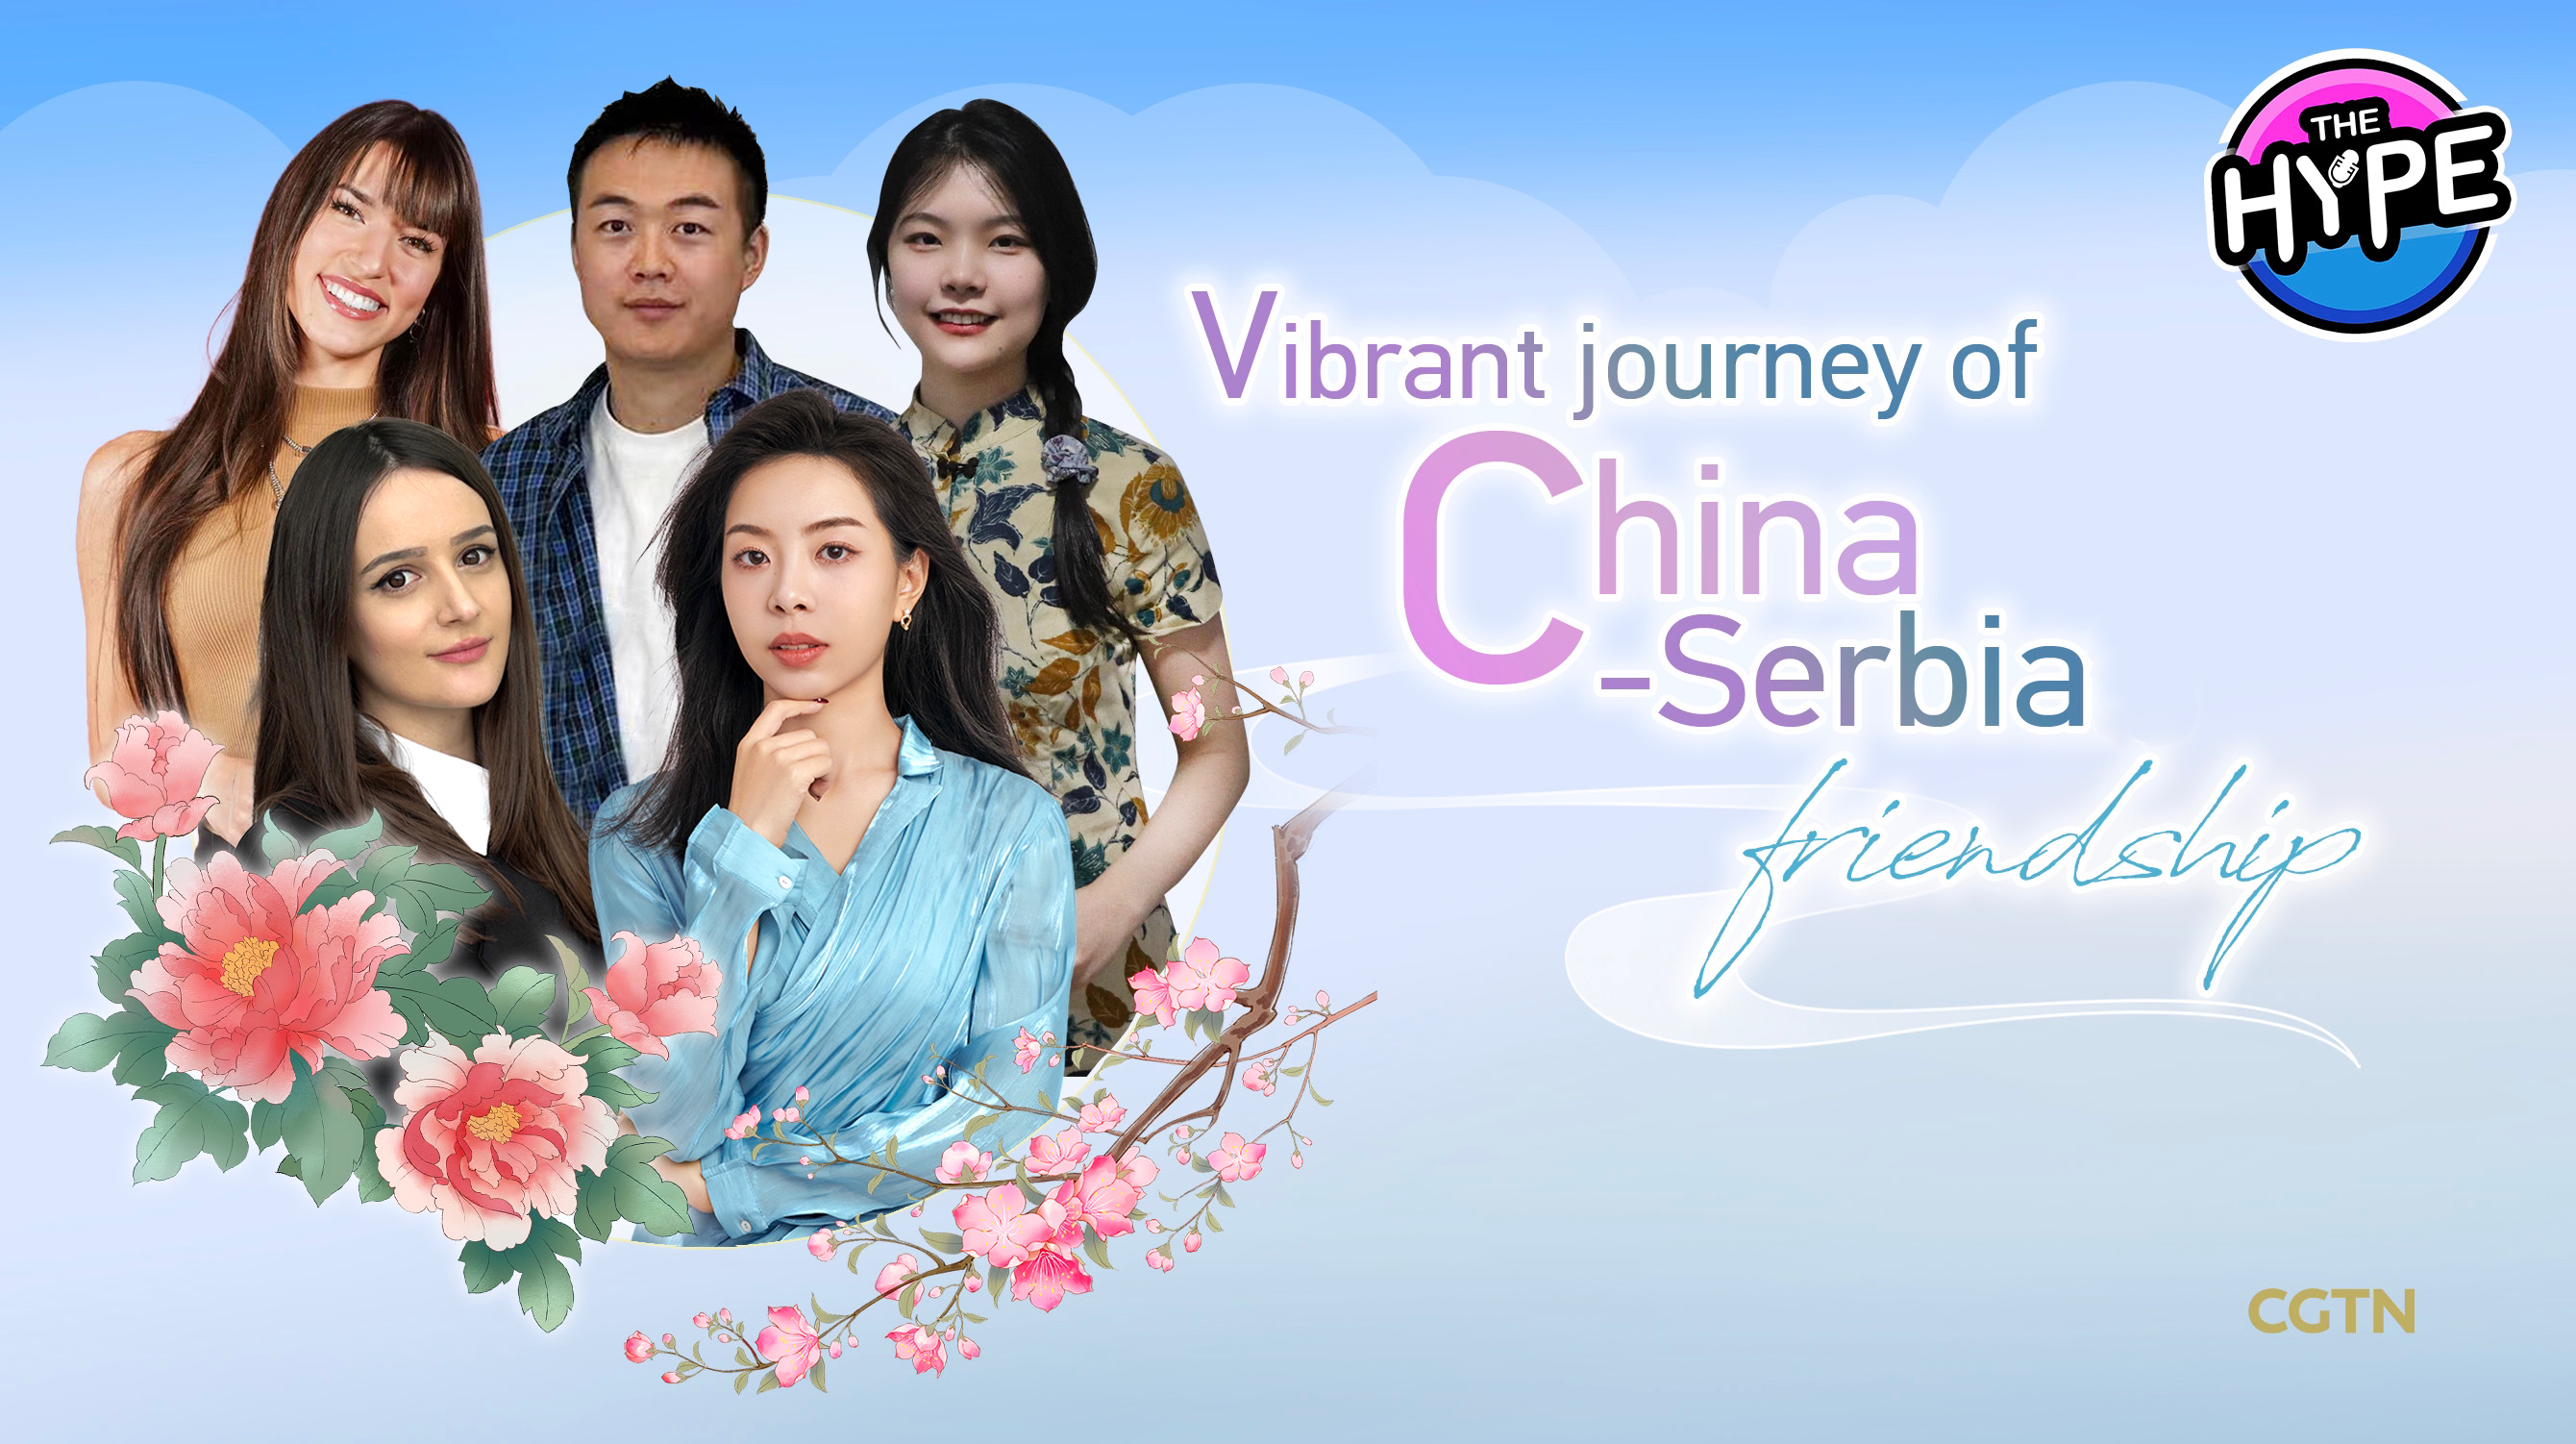 Watch: THE HYPE – Vibrant journey of China-Serbia friendship